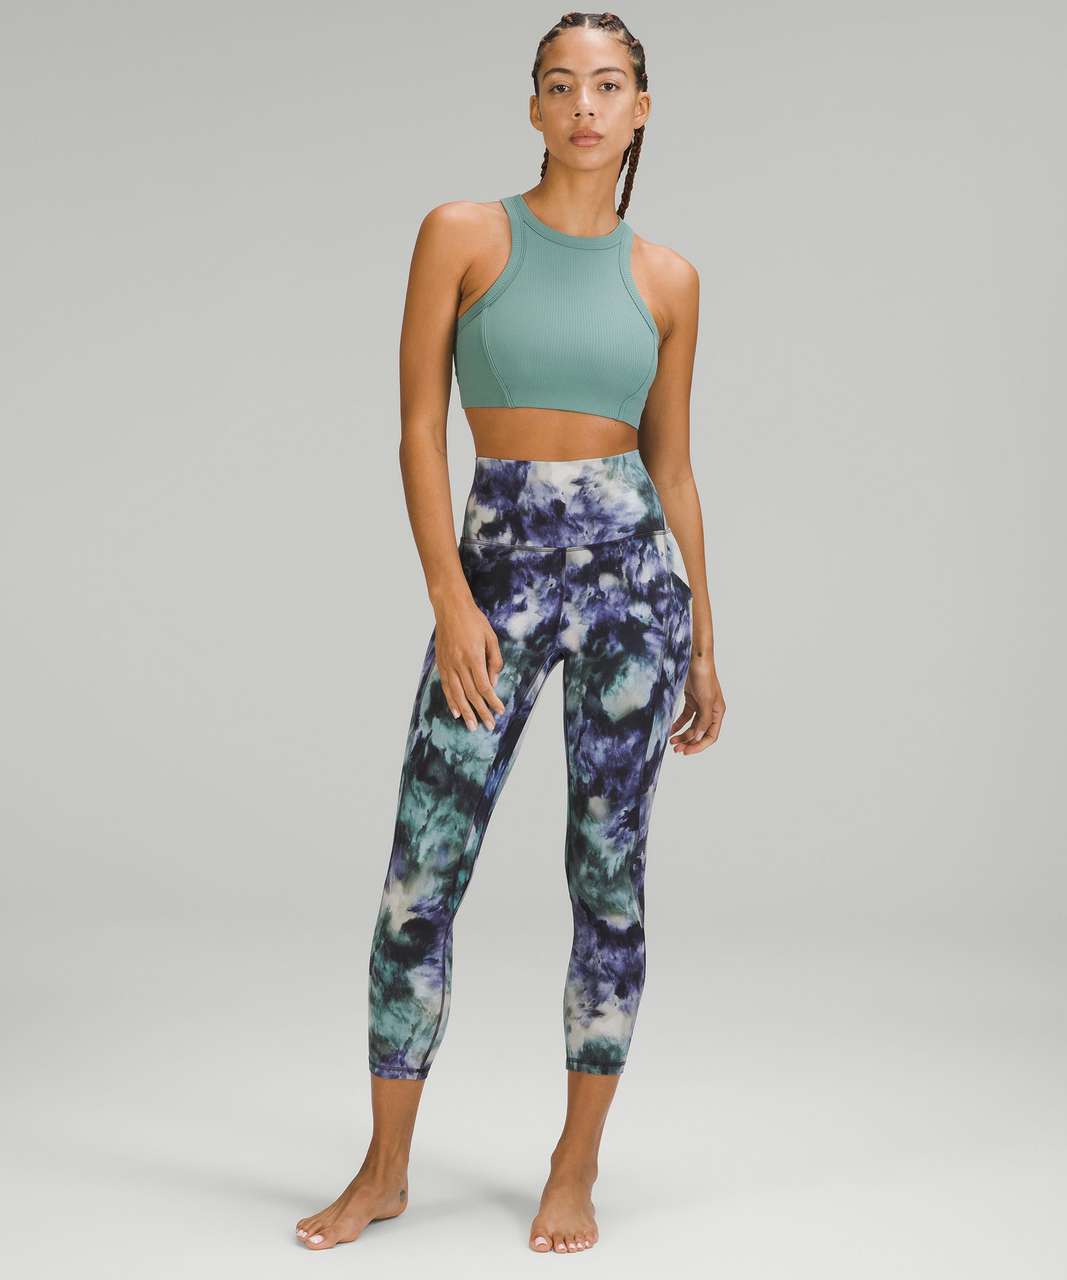 Lululemon Align High-Rise Crop with Pockets 23" - Meteor Wash Print Multi